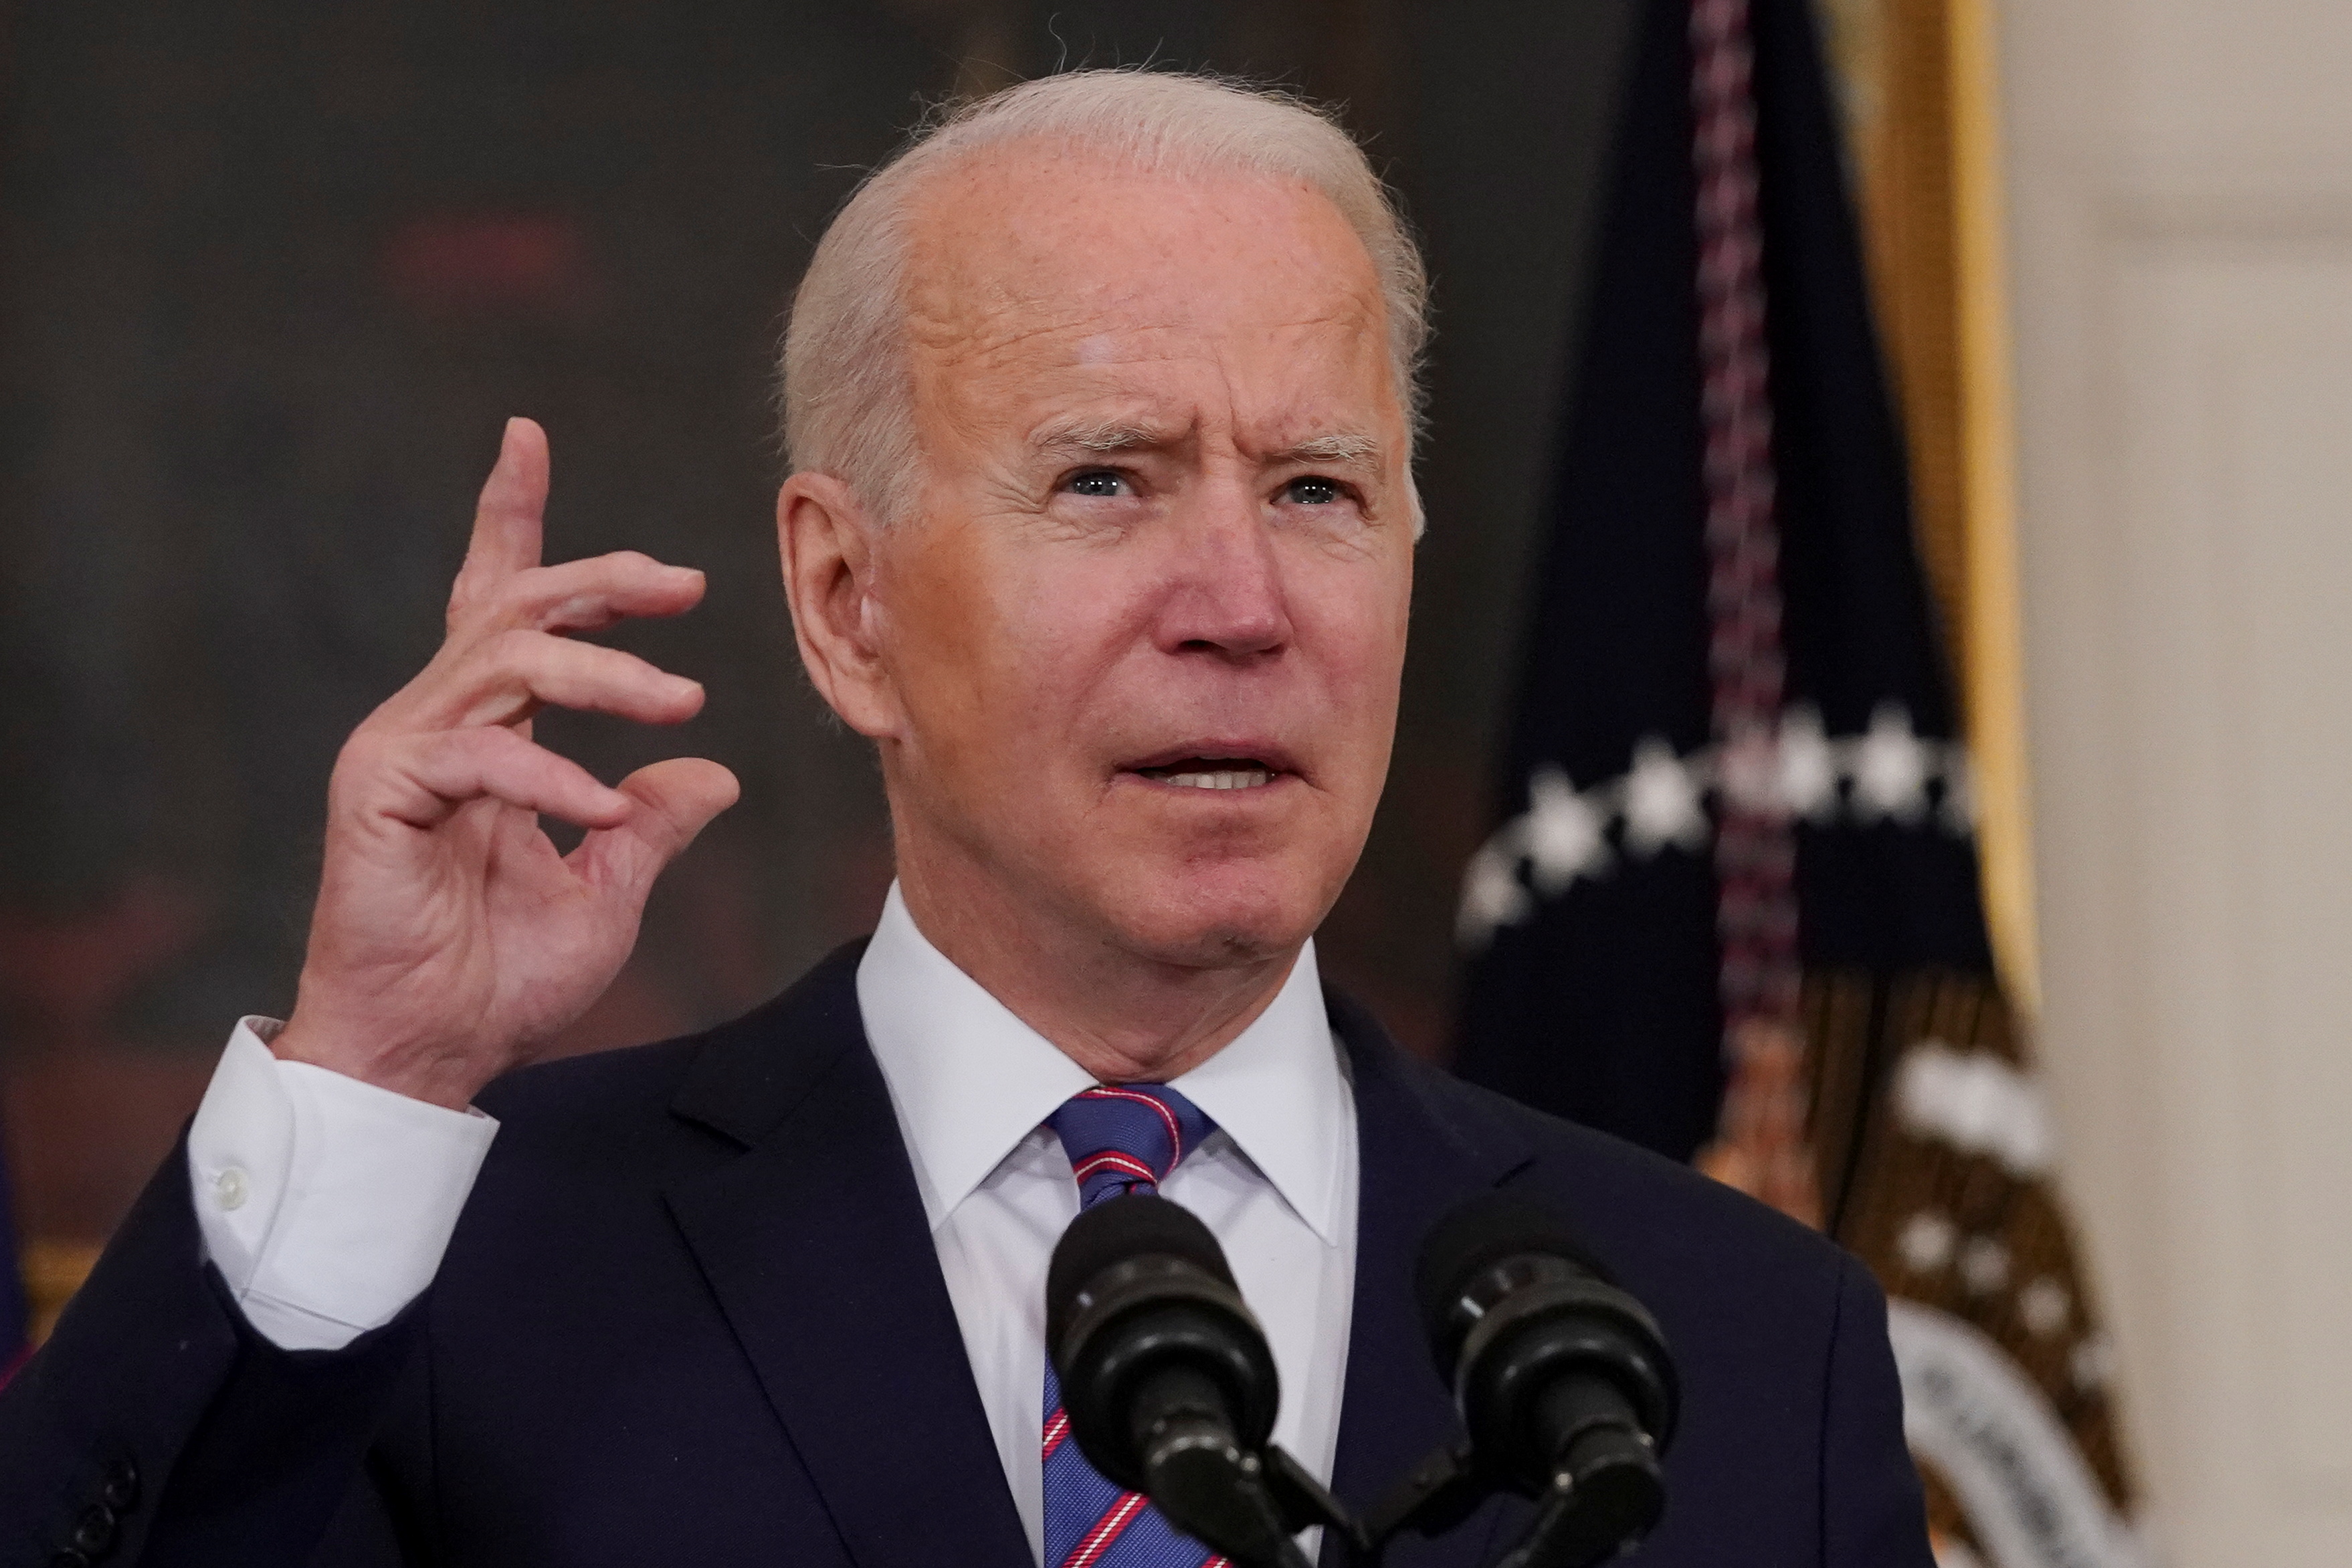 U.S. President Biden delivers remarks on the Department of Labor's March jobs report, in Washington